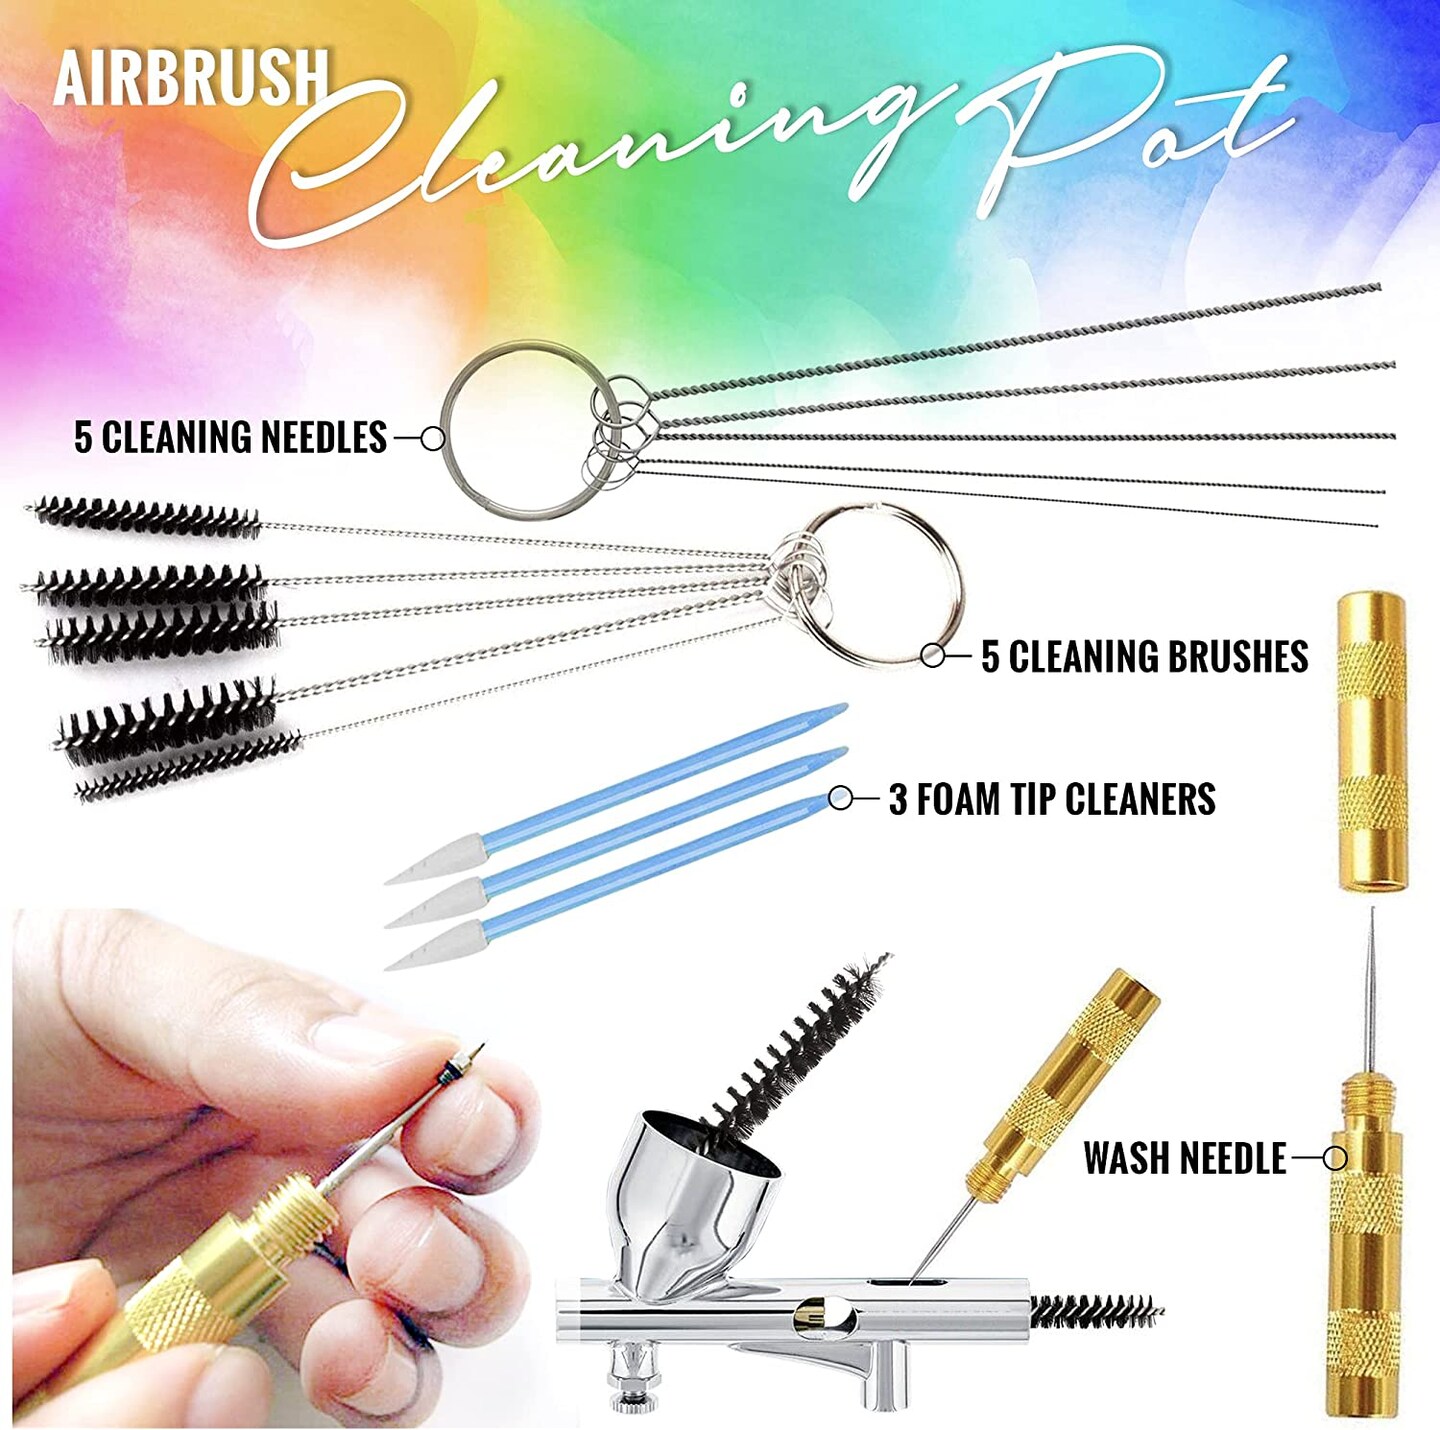 Pixiss Airbrush Cleaning Kit, Brush Cleaner Solution and Airbrush Cleaning Pot